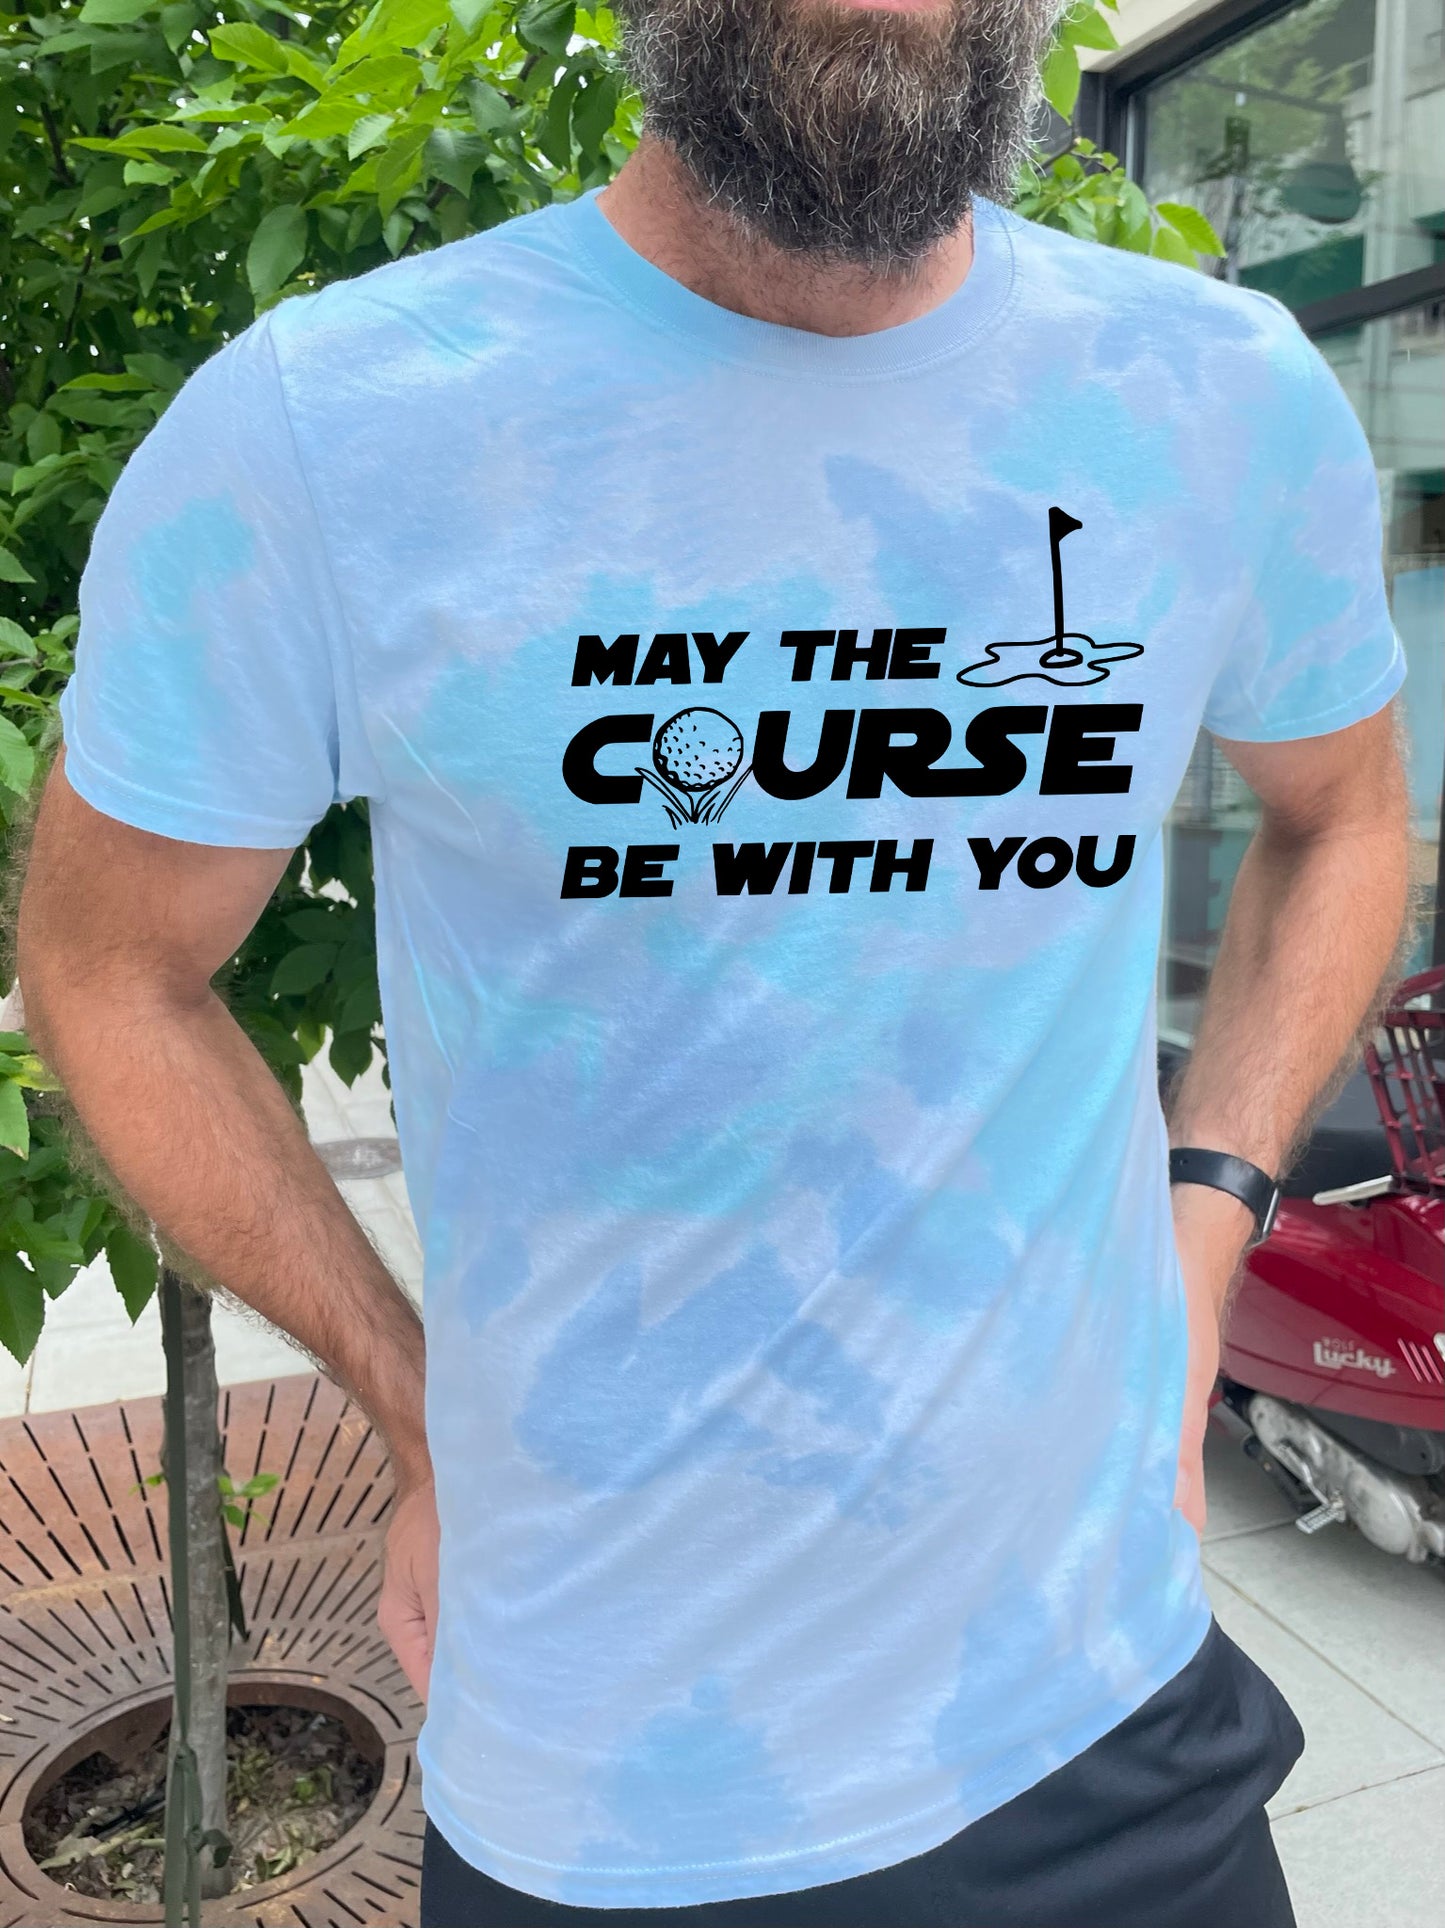 a man with a beard wearing a t - shirt that says may the course be